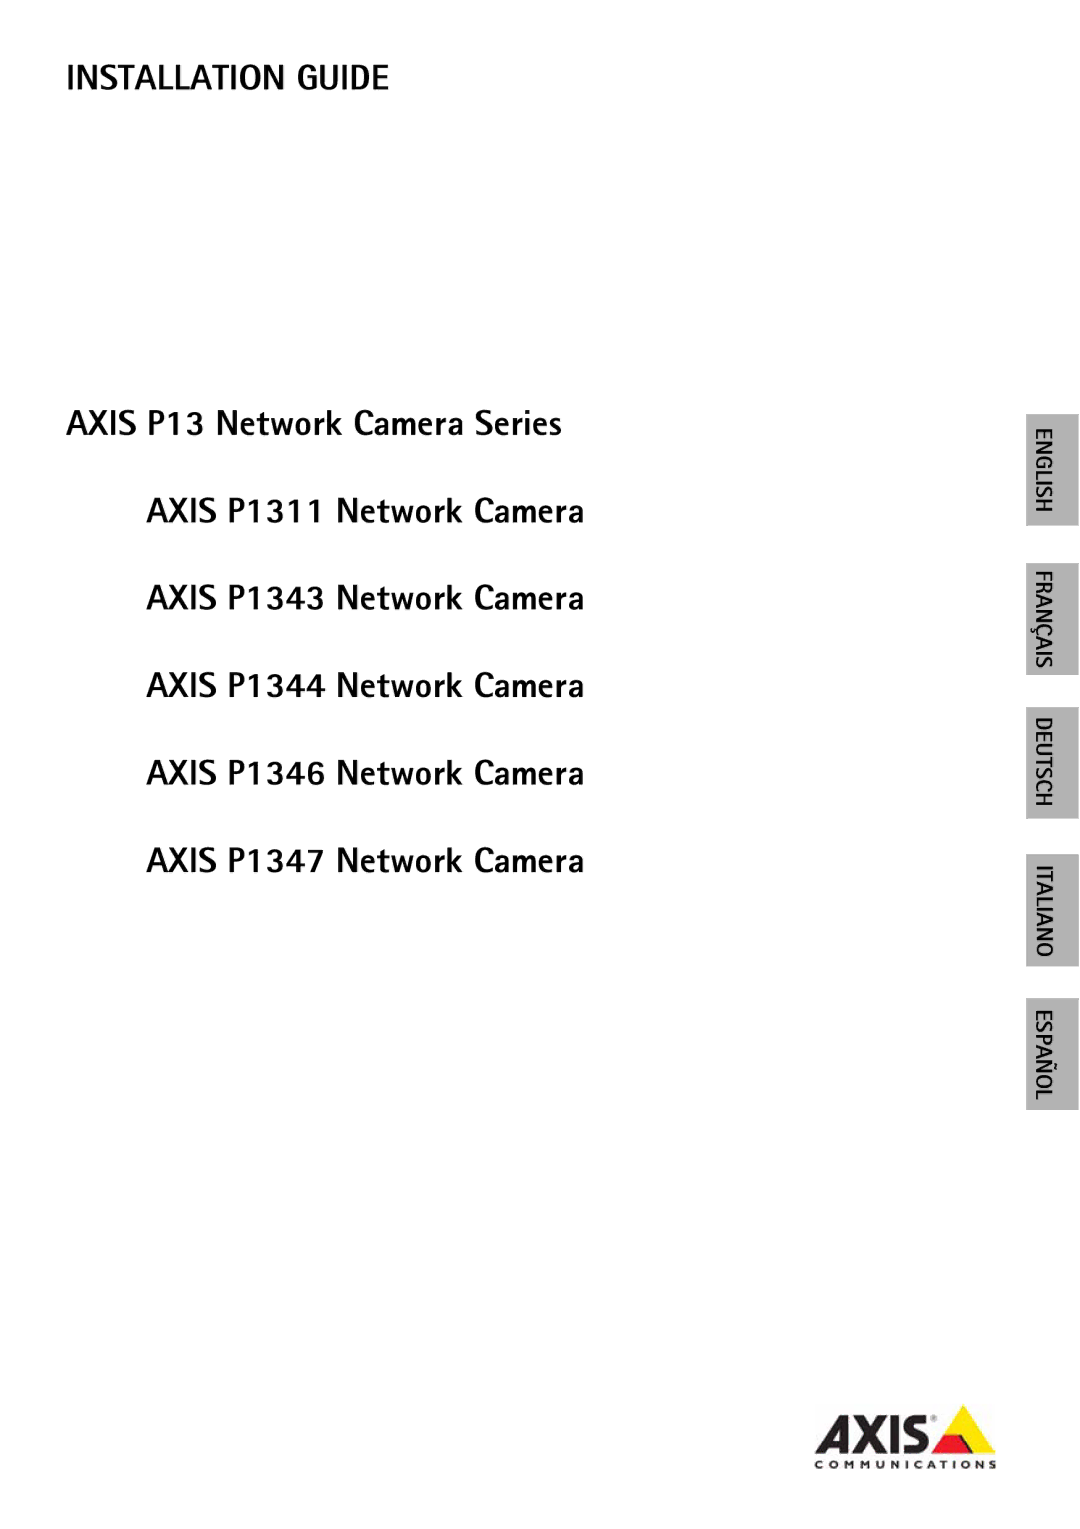 Axis Communications P1347, P1344, P1343, P1311 manual Installation Guide 